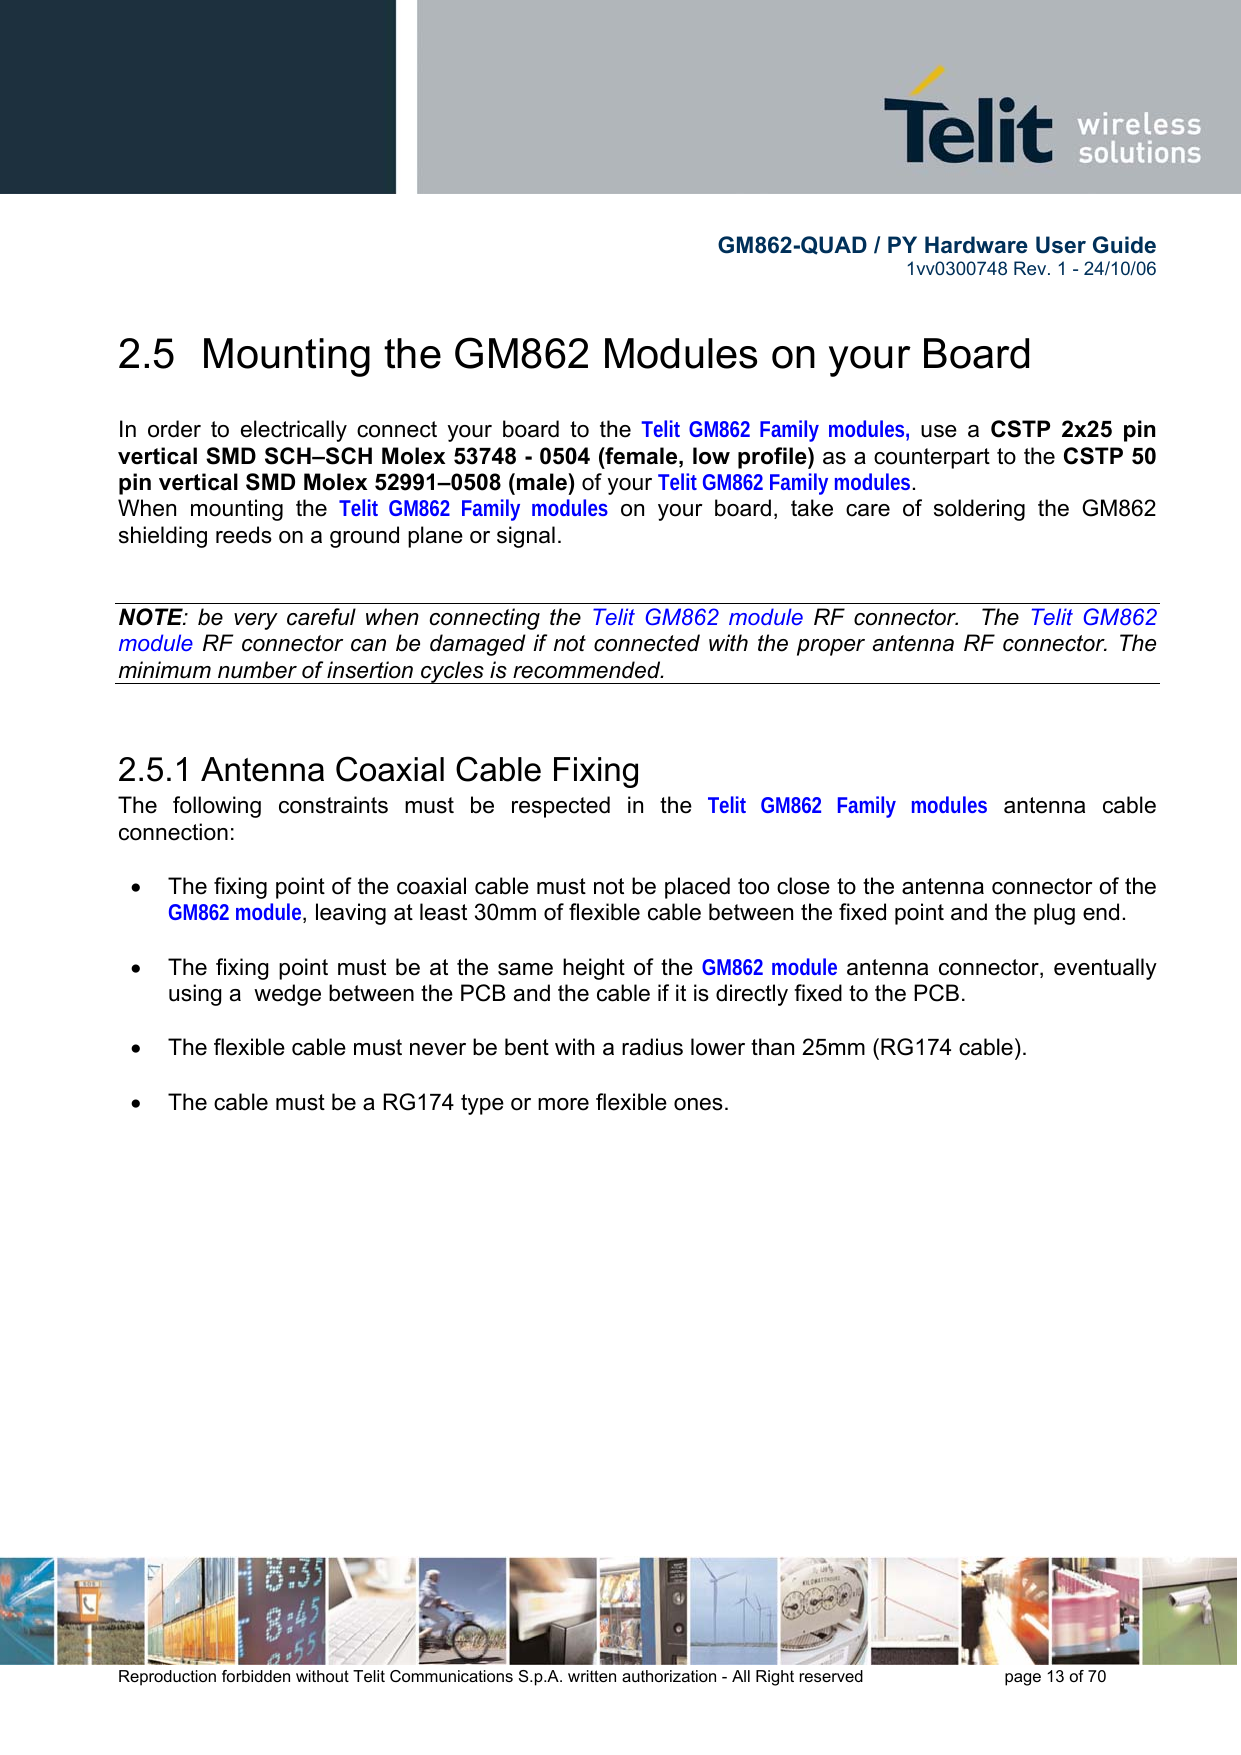        GM862-QUAD / PY Hardware User Guide   1vv0300748 Rev. 1 - 24/10/06    Reproduction forbidden without Telit Communications S.p.A. written authorization - All Right reserved    page 13 of 70  2.5  Mounting the GM862 Modules on your Board  In order to electrically connect your board to the Telit GM862 Family modules, use a CSTP 2x25 pin vertical SMD SCH–SCH Molex 53748 - 0504 (female, low profile) as a counterpart to the CSTP 50 pin vertical SMD Molex 52991–0508 (male) of your Telit GM862 Family modules. When mounting the Telit GM862 Family modules on your board, take care of soldering the GM862 shielding reeds on a ground plane or signal.   NOTE: be very careful when connecting the Telit GM862 module RF connector.  The Telit GM862 module RF connector can be damaged if not connected with the proper antenna RF connector. The minimum number of insertion cycles is recommended.  2.5.1 Antenna Coaxial Cable Fixing The following constraints must be respected in the Telit GM862 Family modules antenna cable connection:  •  The fixing point of the coaxial cable must not be placed too close to the antenna connector of the GM862 module, leaving at least 30mm of flexible cable between the fixed point and the plug end.  •  The fixing point must be at the same height of the GM862 module antenna connector, eventually using a  wedge between the PCB and the cable if it is directly fixed to the PCB.  •  The flexible cable must never be bent with a radius lower than 25mm (RG174 cable).  •  The cable must be a RG174 type or more flexible ones.  